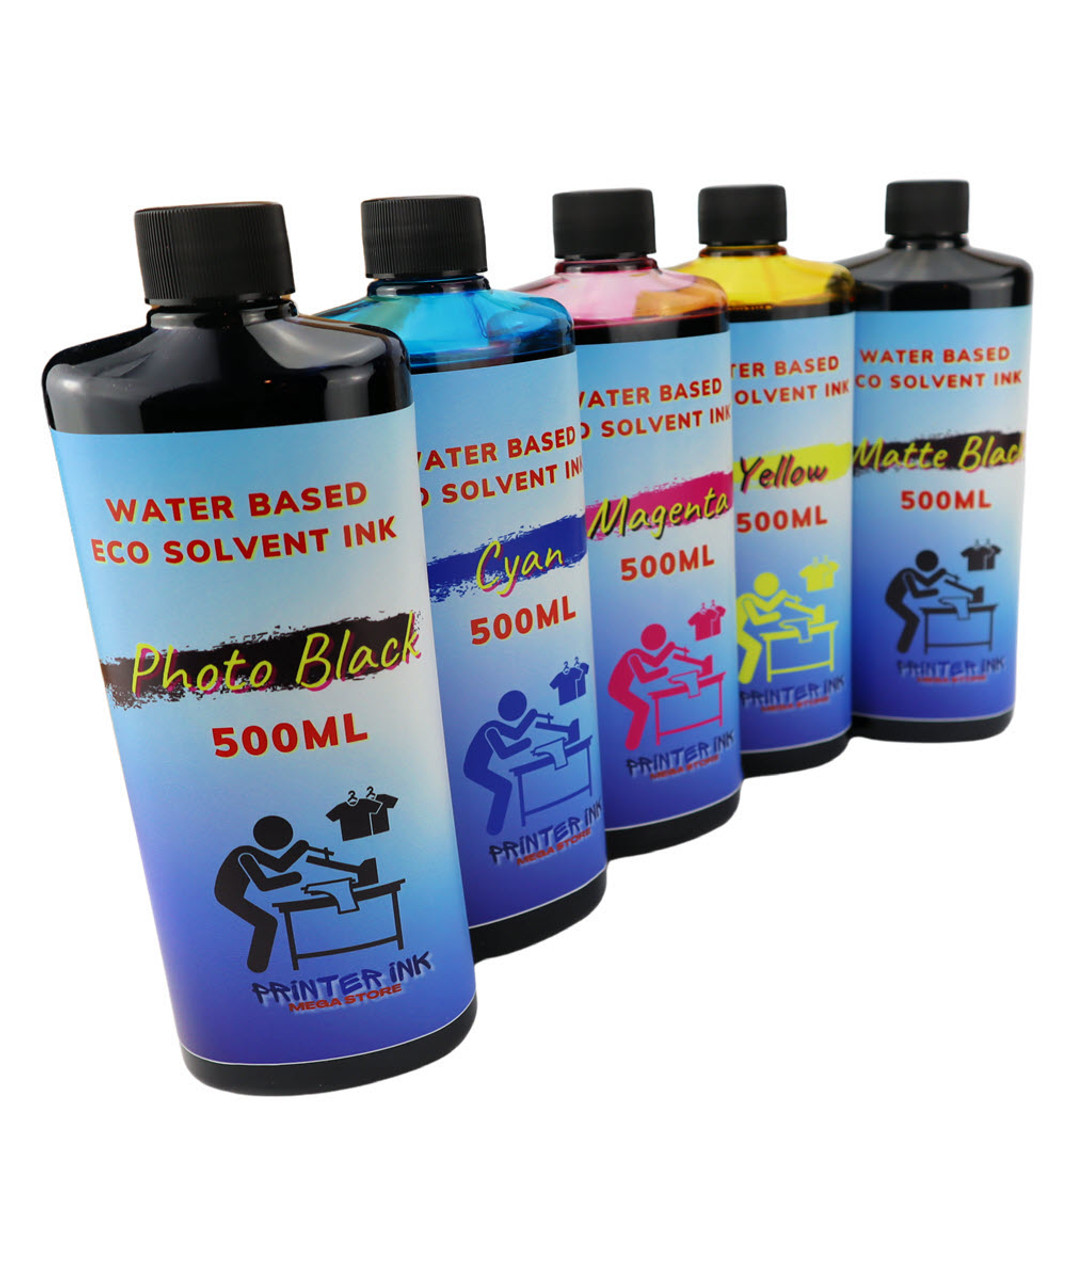 Pick 3 Colors Water Based Eco Solvent Ink 500ml Bottles for Epson SureColor T3270 T5270 T7270 Printers